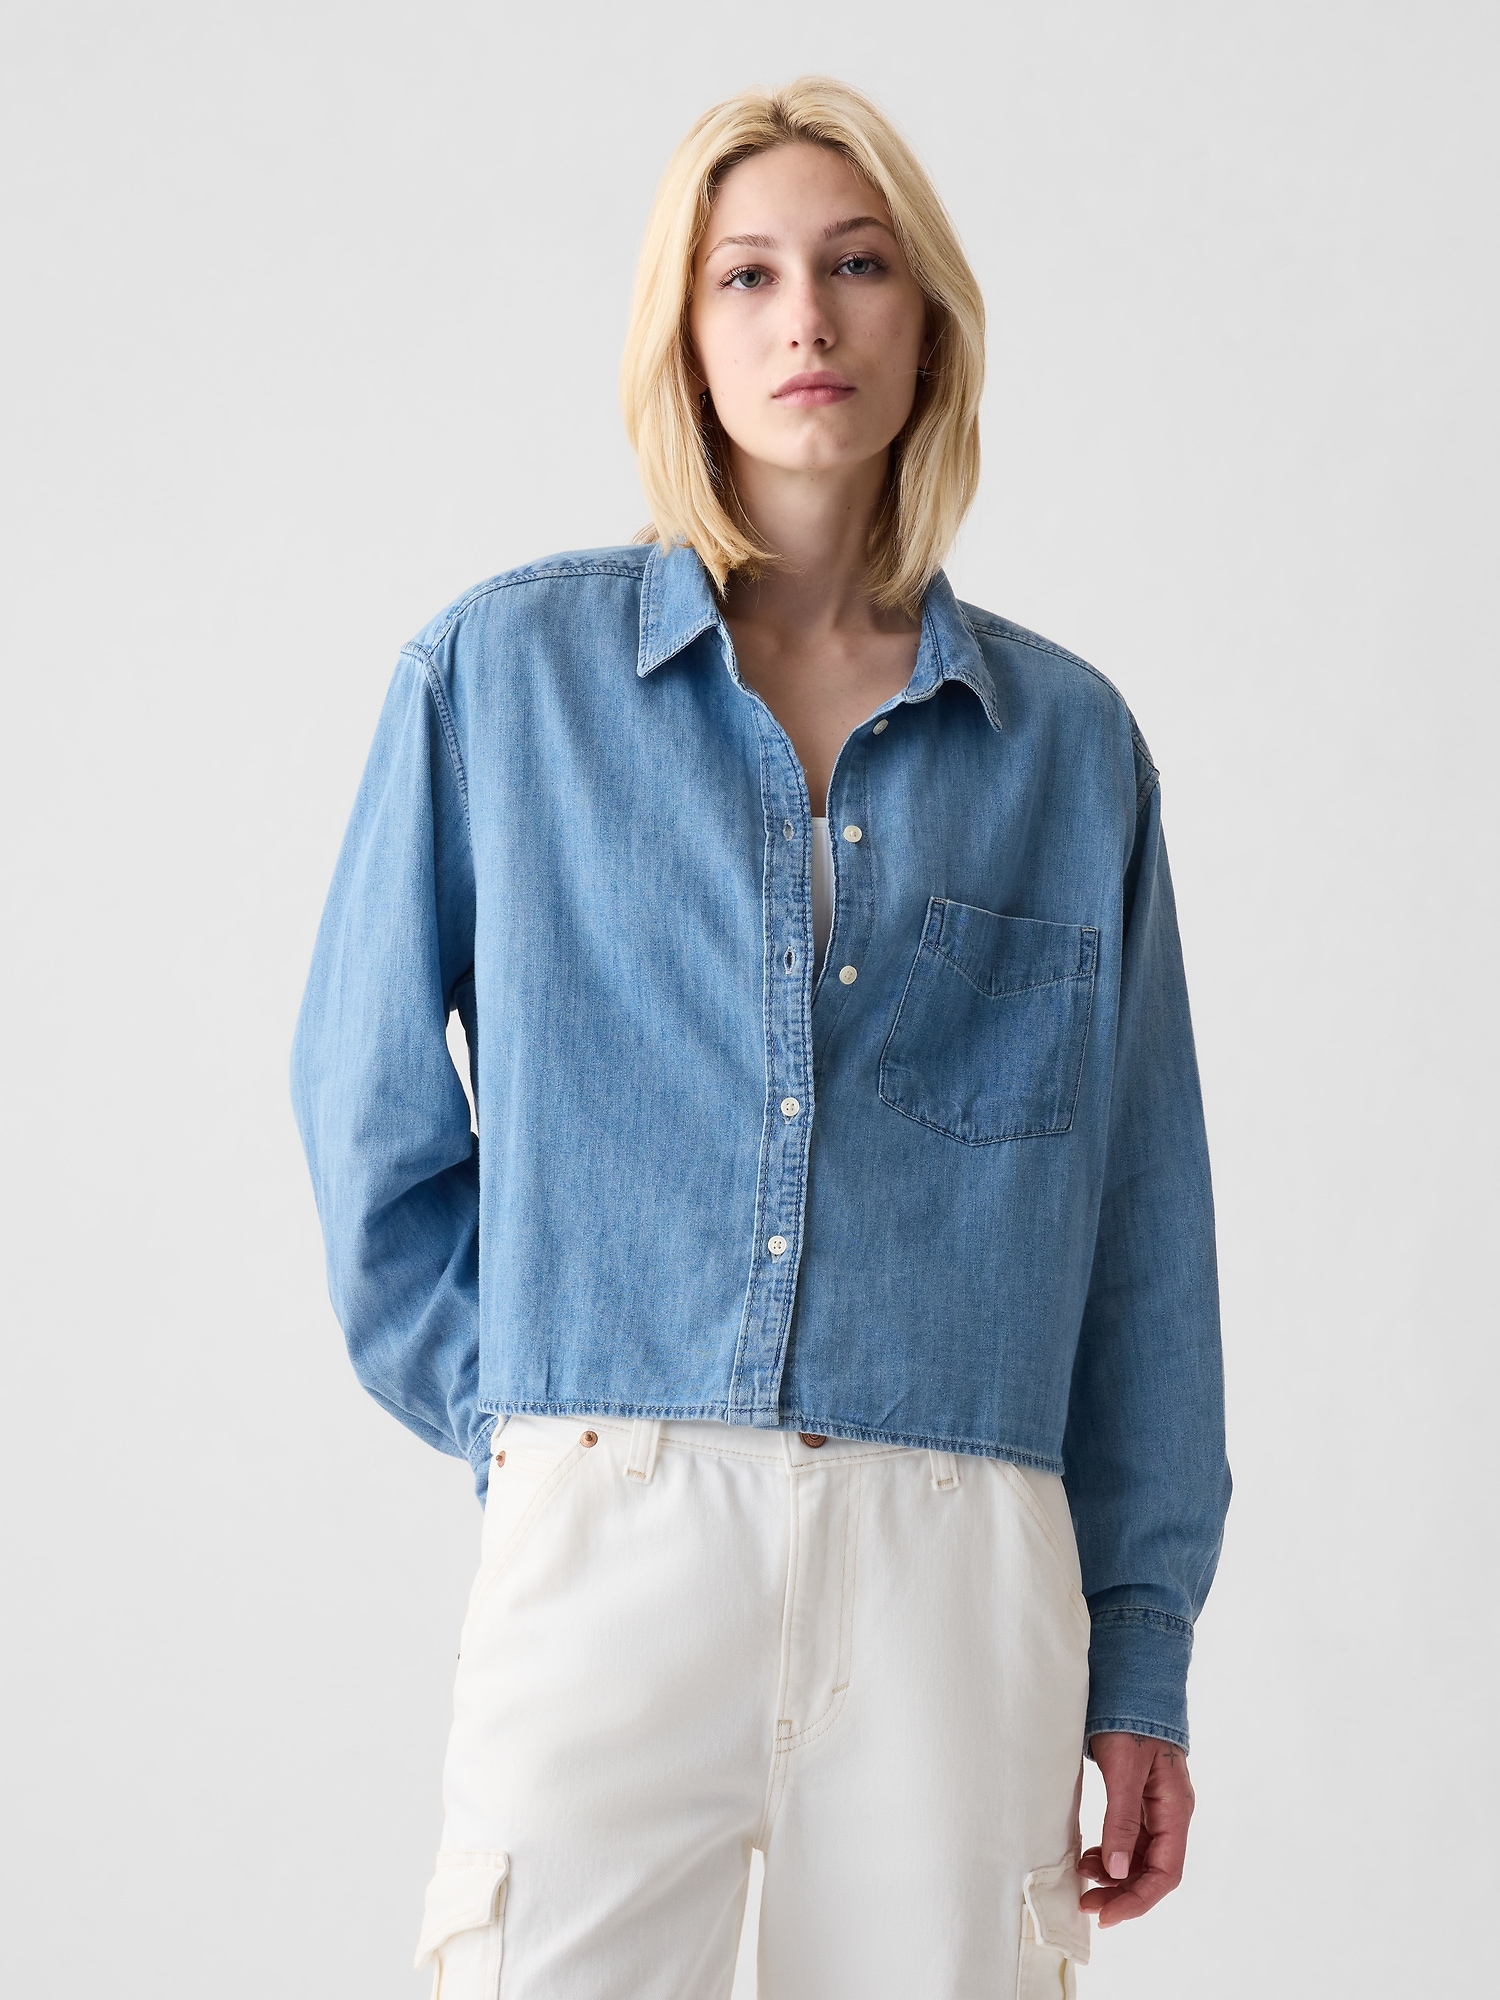 Womens Summer Denim Shirt with Back Split Casual Long Sleeve Turn Down  Collar Jean Blouse Tops with Pockets Blue at Amazon Women's Clothing store